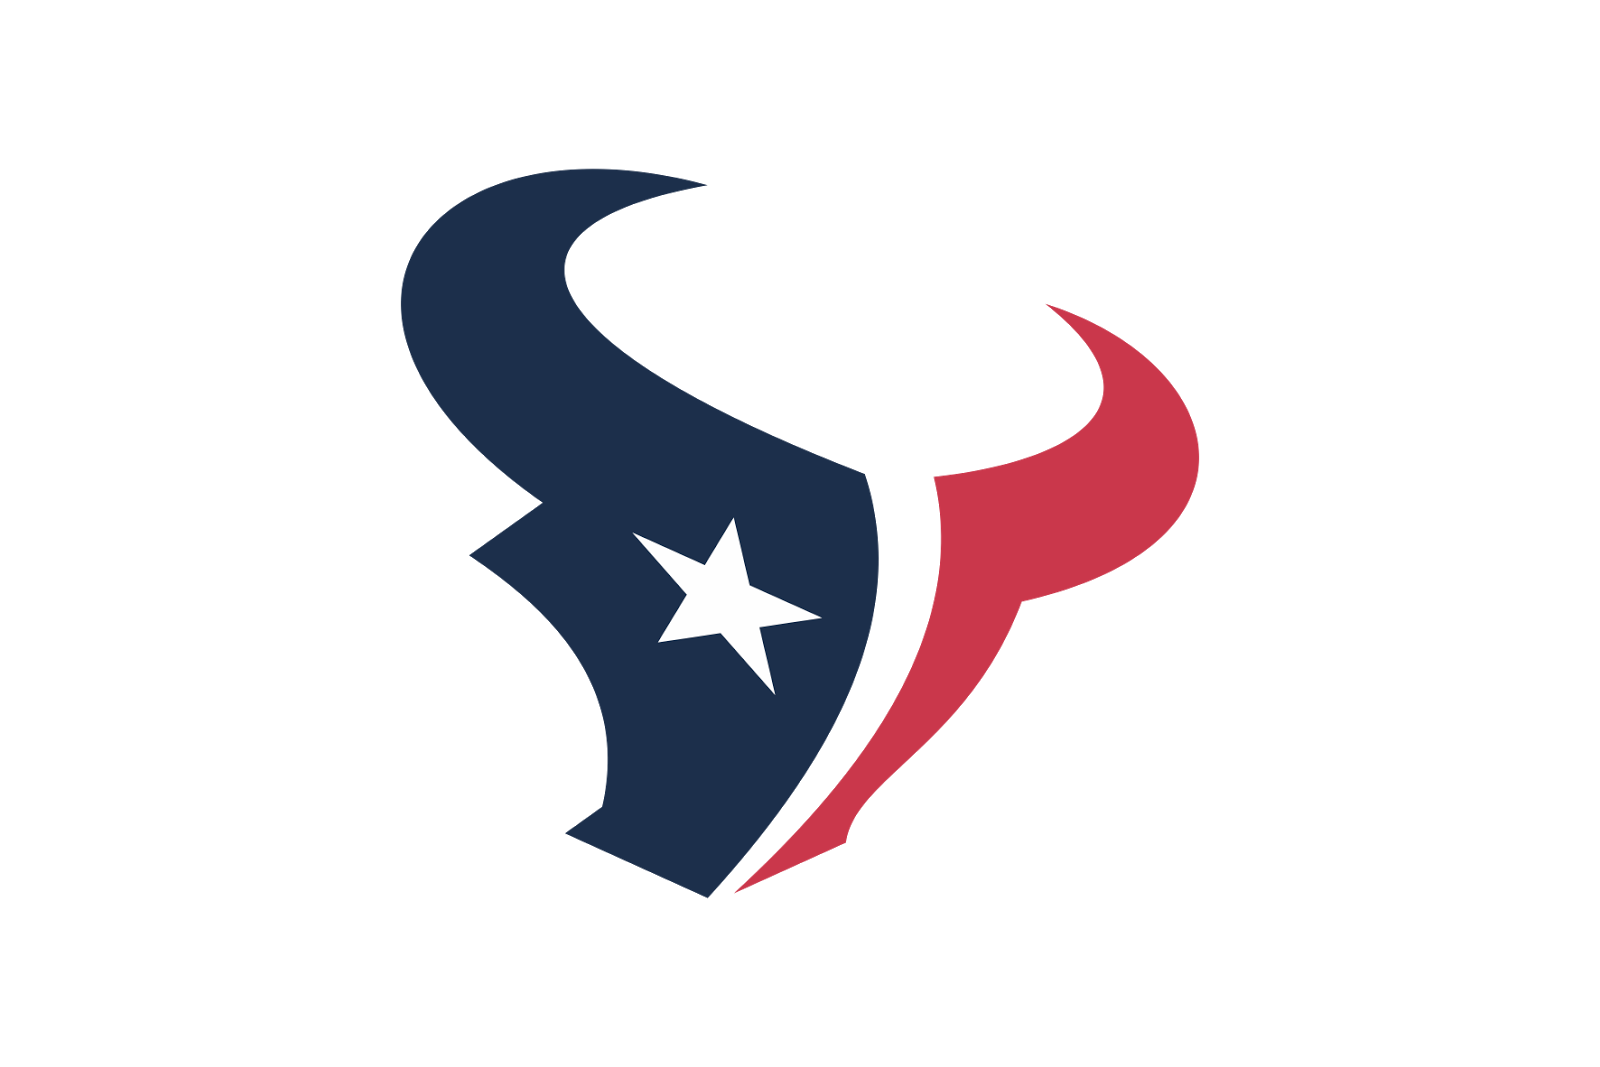 2. NFL Houston Texans Nail Art Decals - wide 8